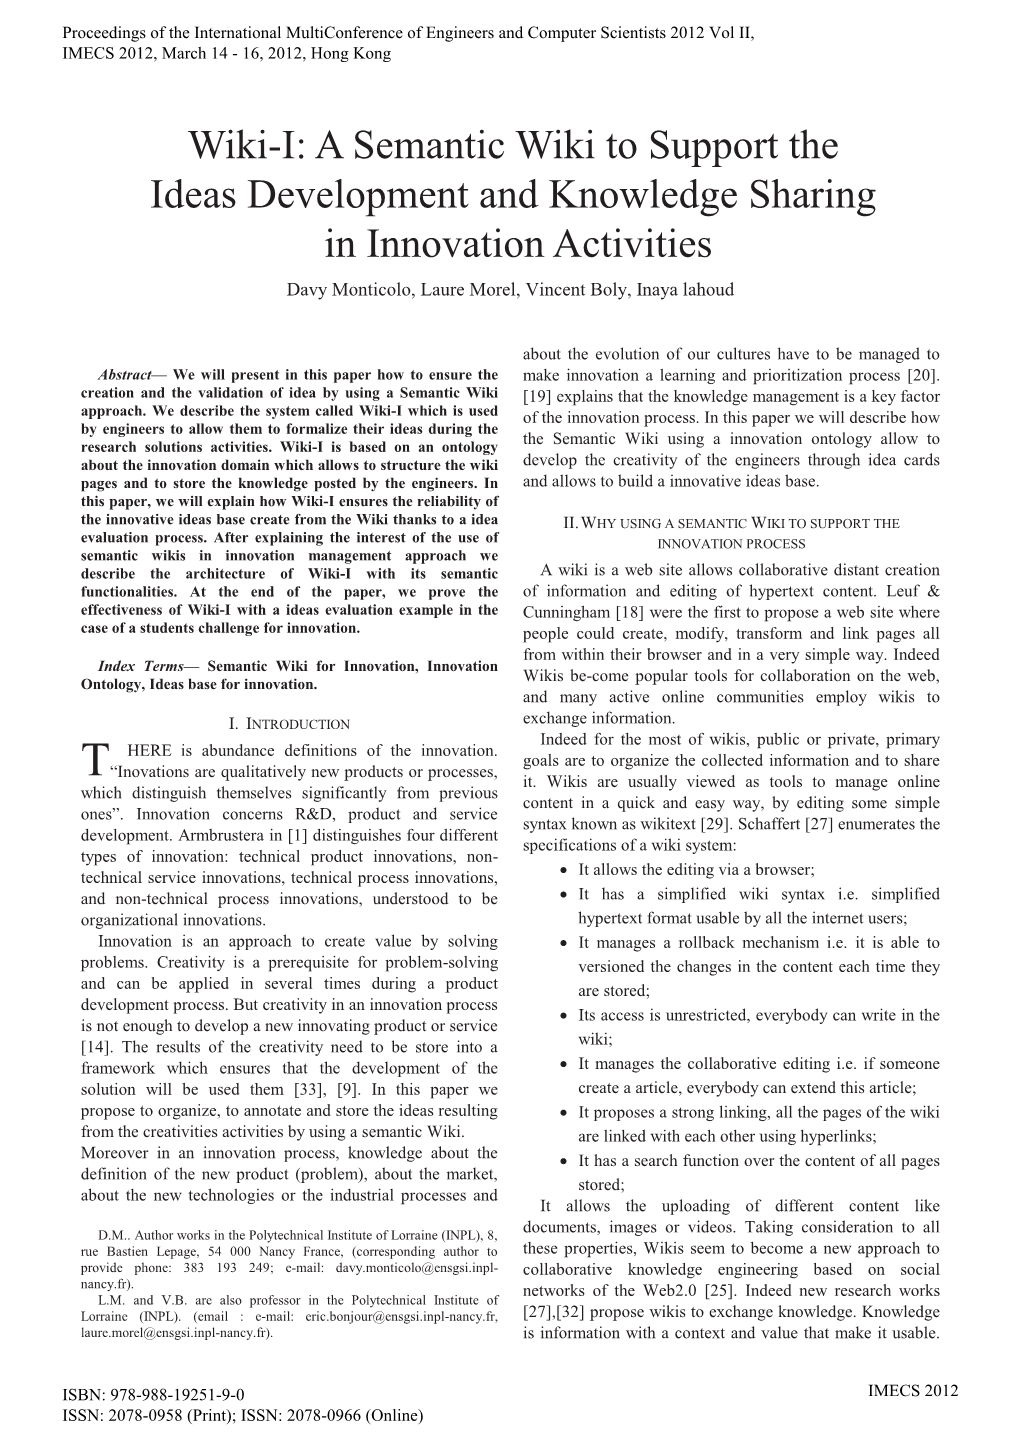 A Semantic Wiki to Support the Ideas Development and Knowledge Sharing in Innovation Activities